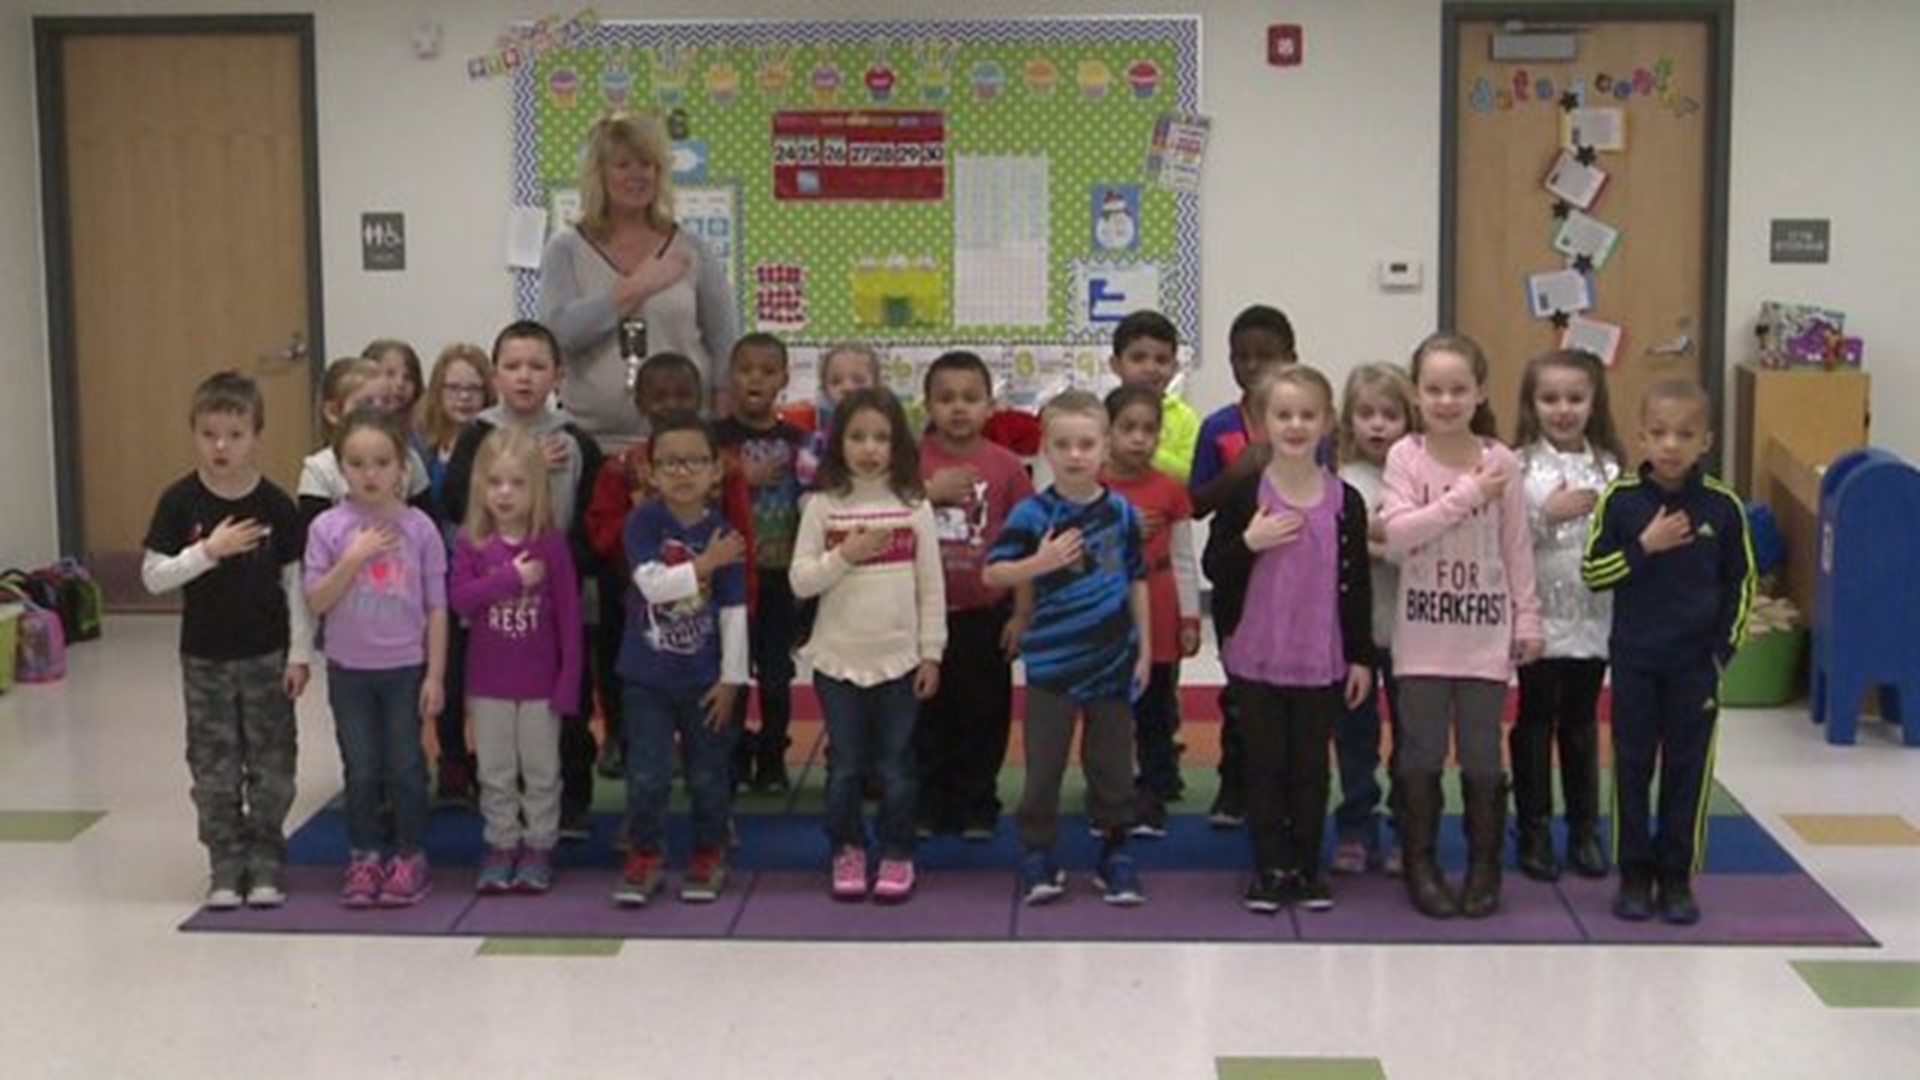 The Pledge from Mrs. Murphy`s class at Hamilton Elementary